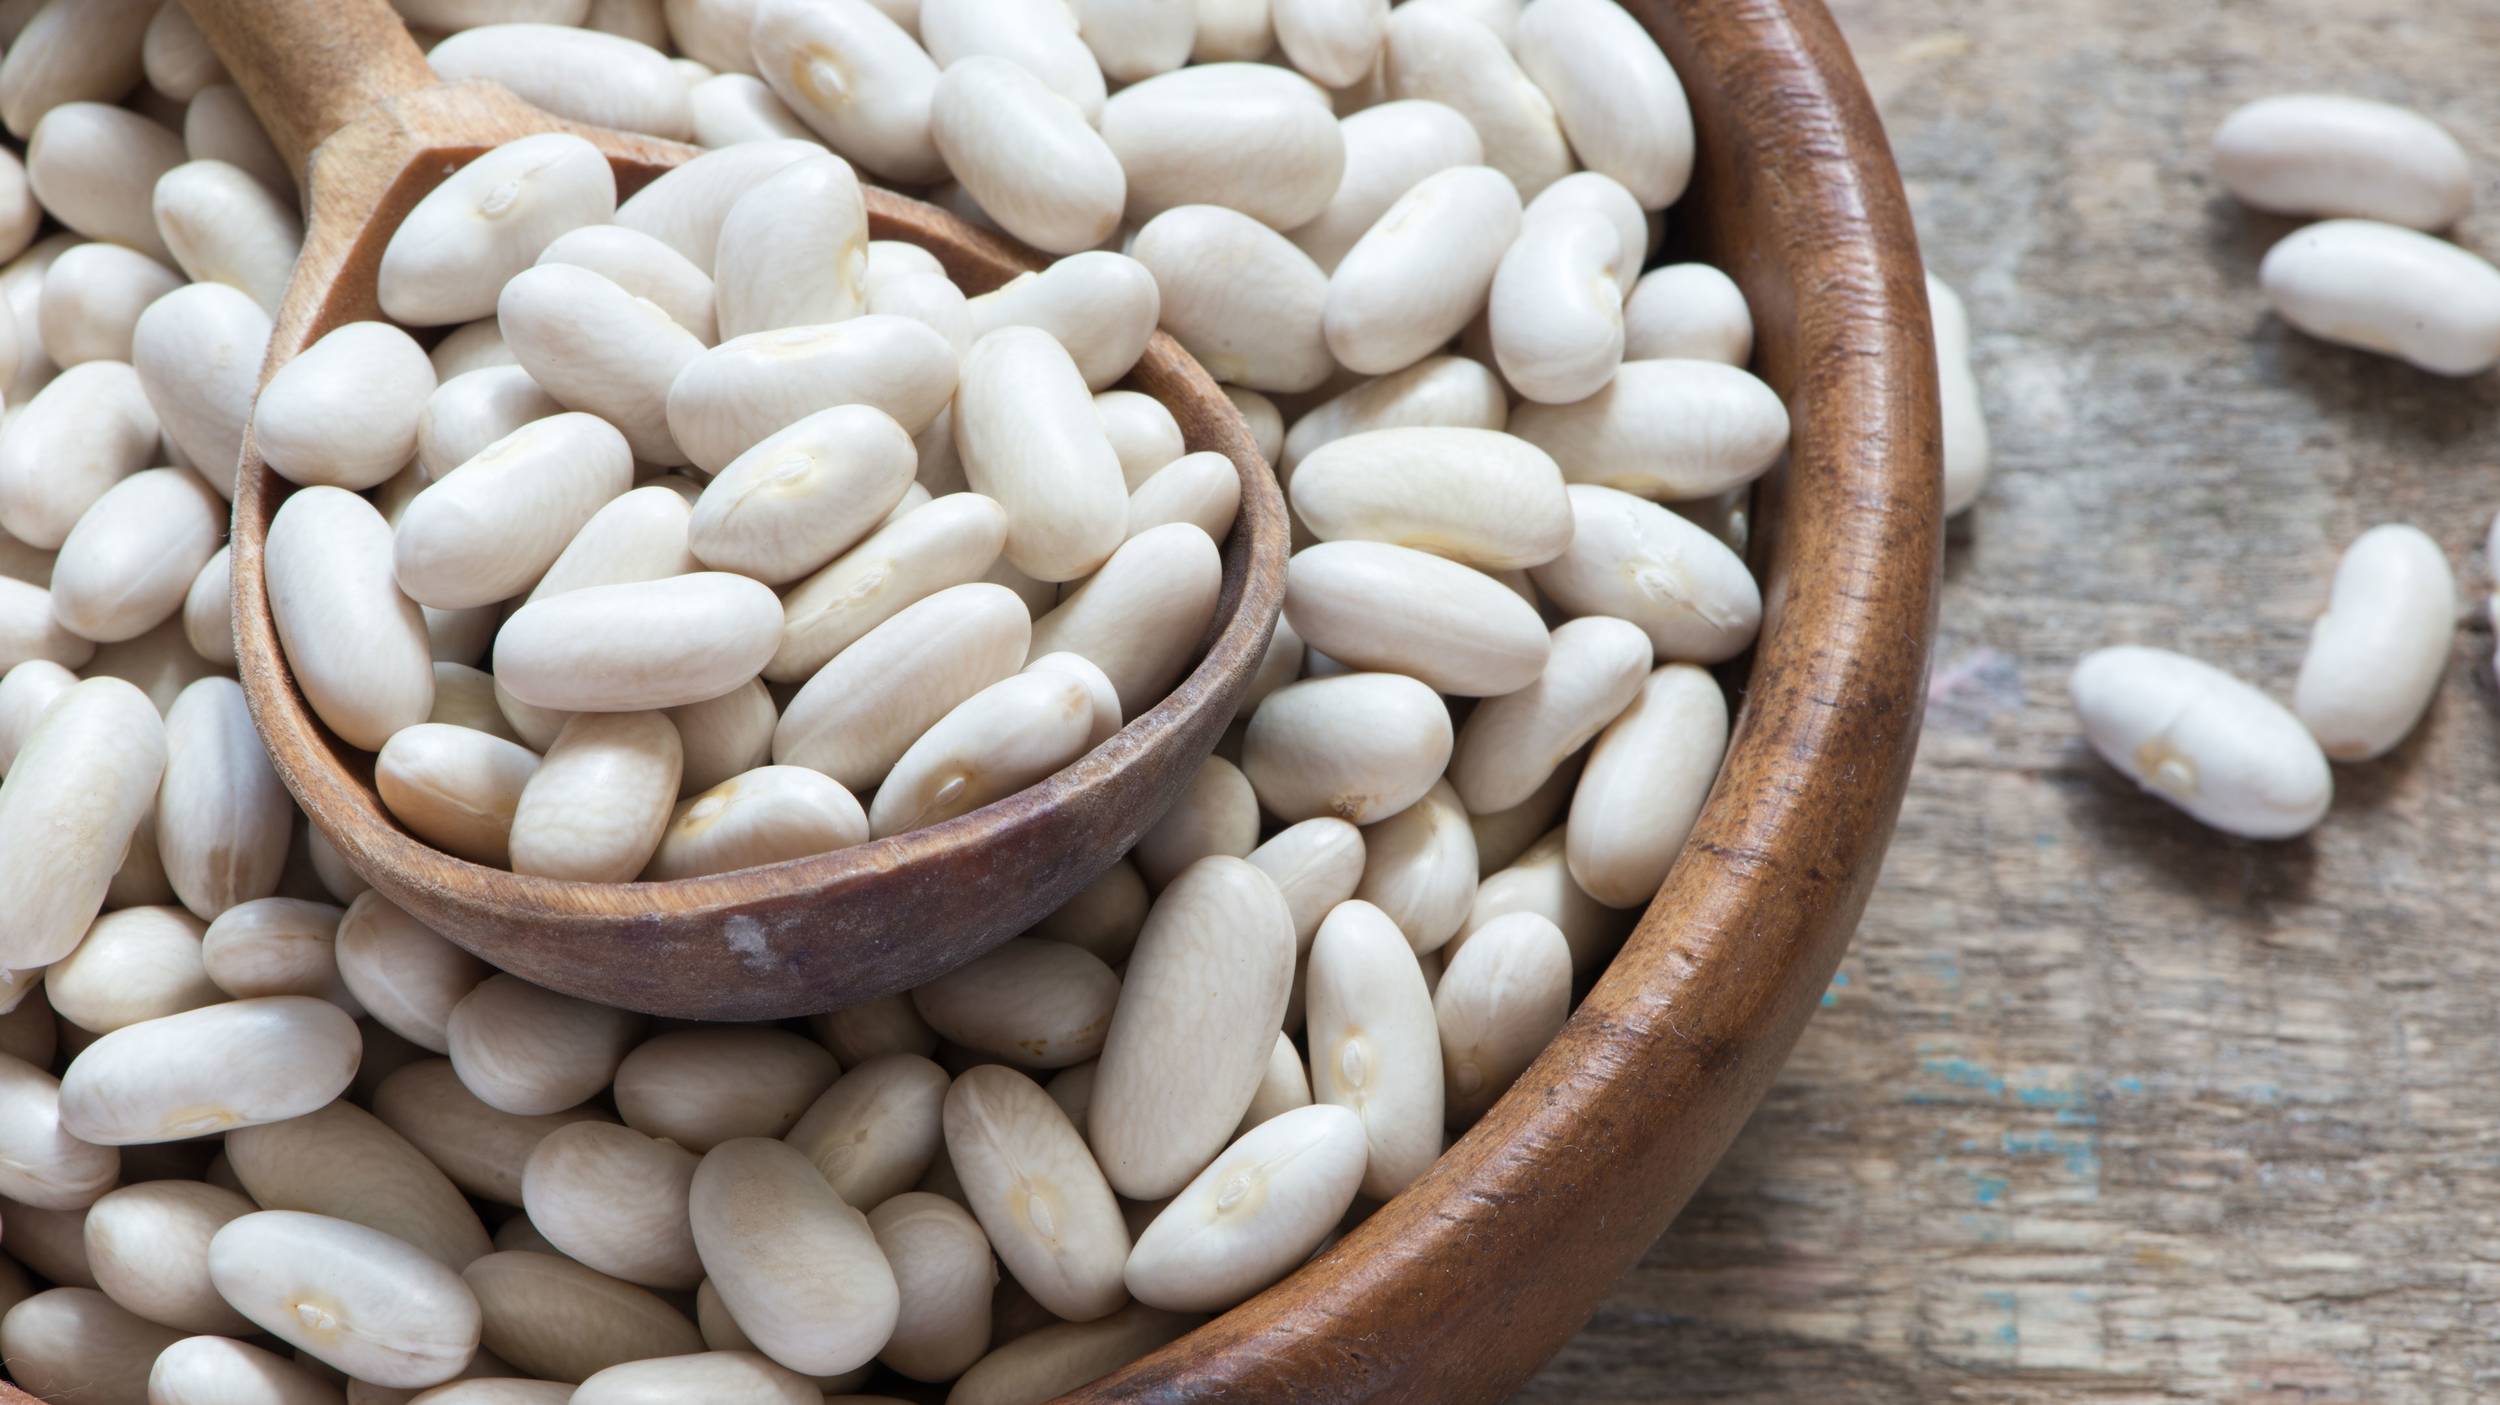 Known for their soft texture and ability to carry flavor, cannellini beans are a great addition to stews, chillis, soups, casseroles and curry dishes.